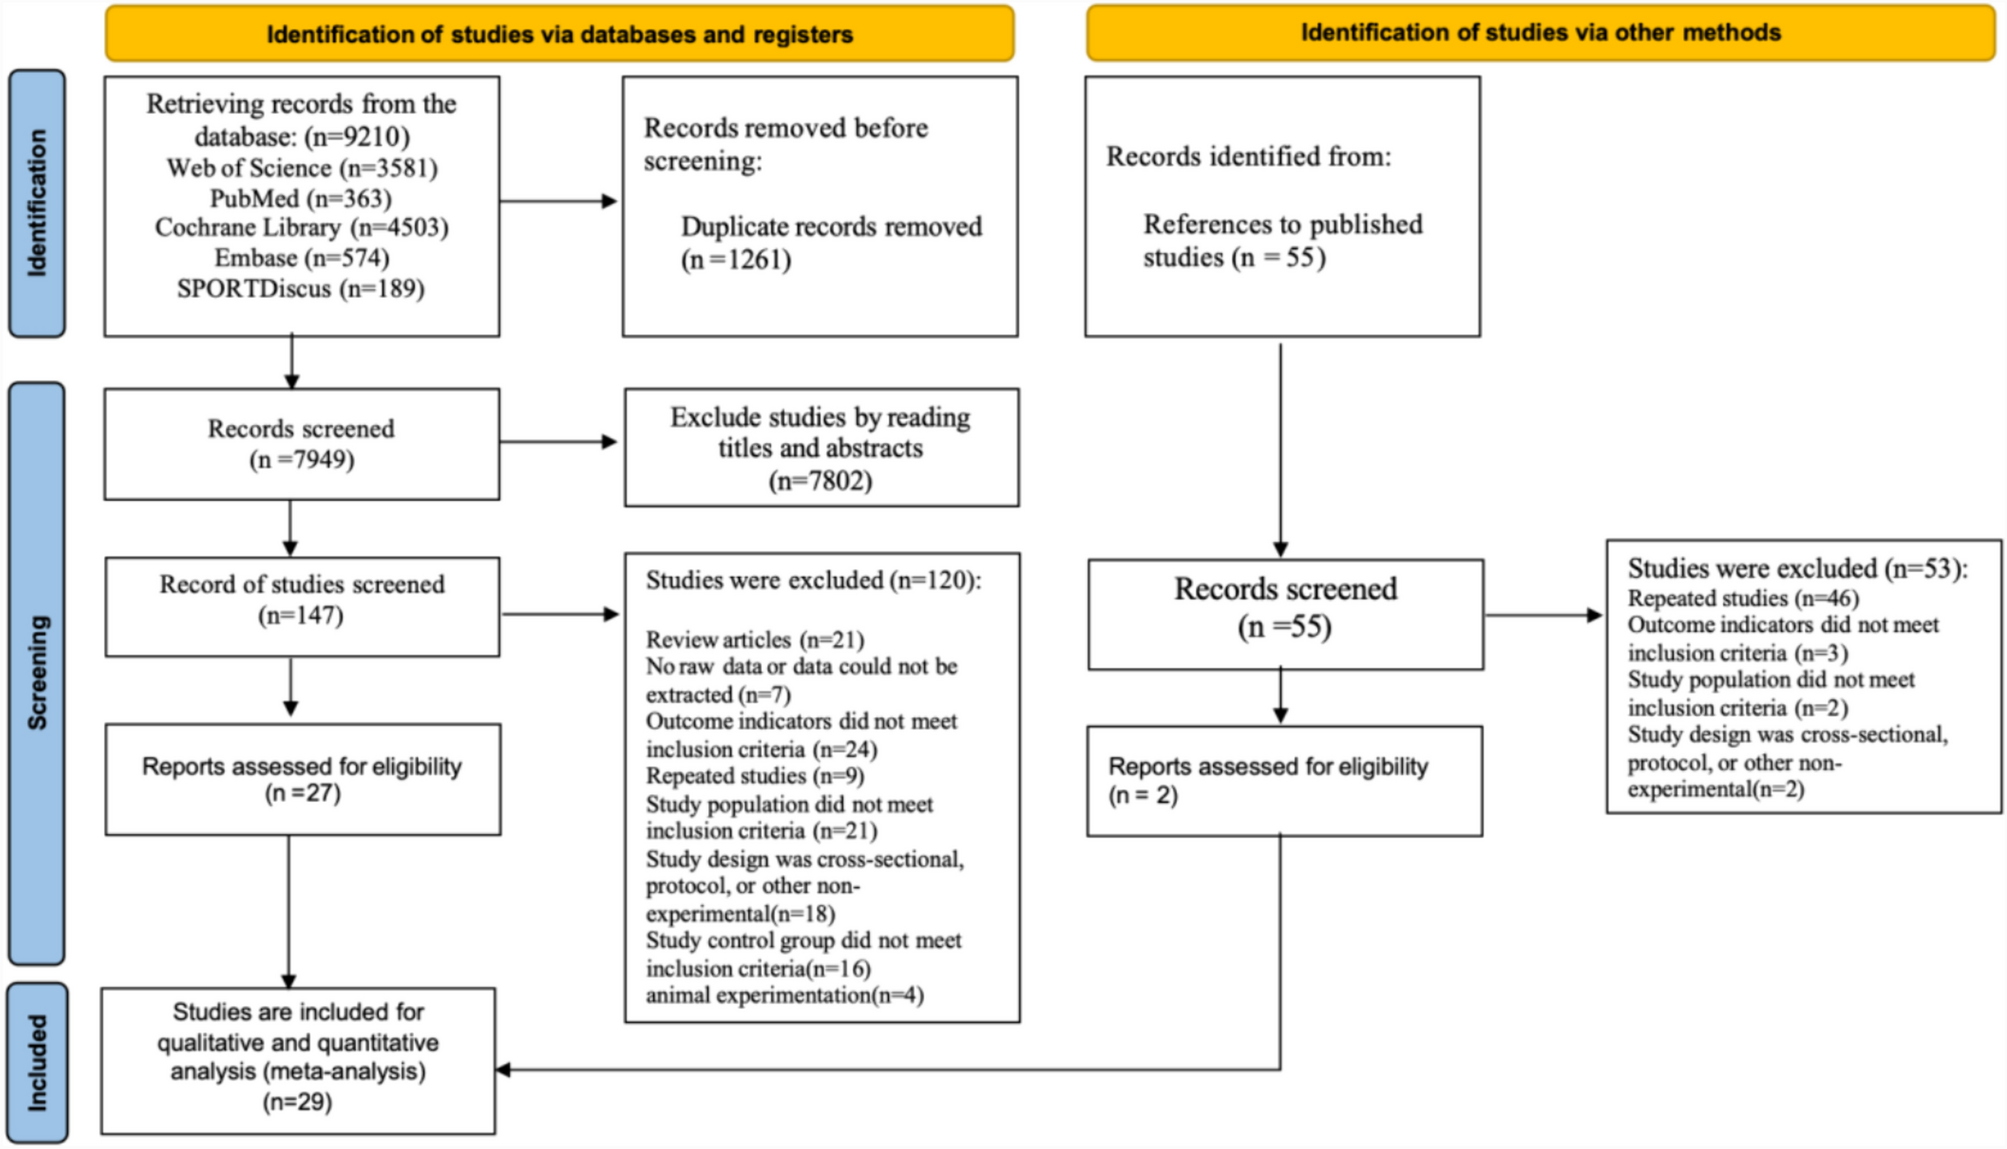 Optimal exercise intensity for improving executive function in patients with attention deficit hyperactivity disorder: systematic review and network meta-analysis